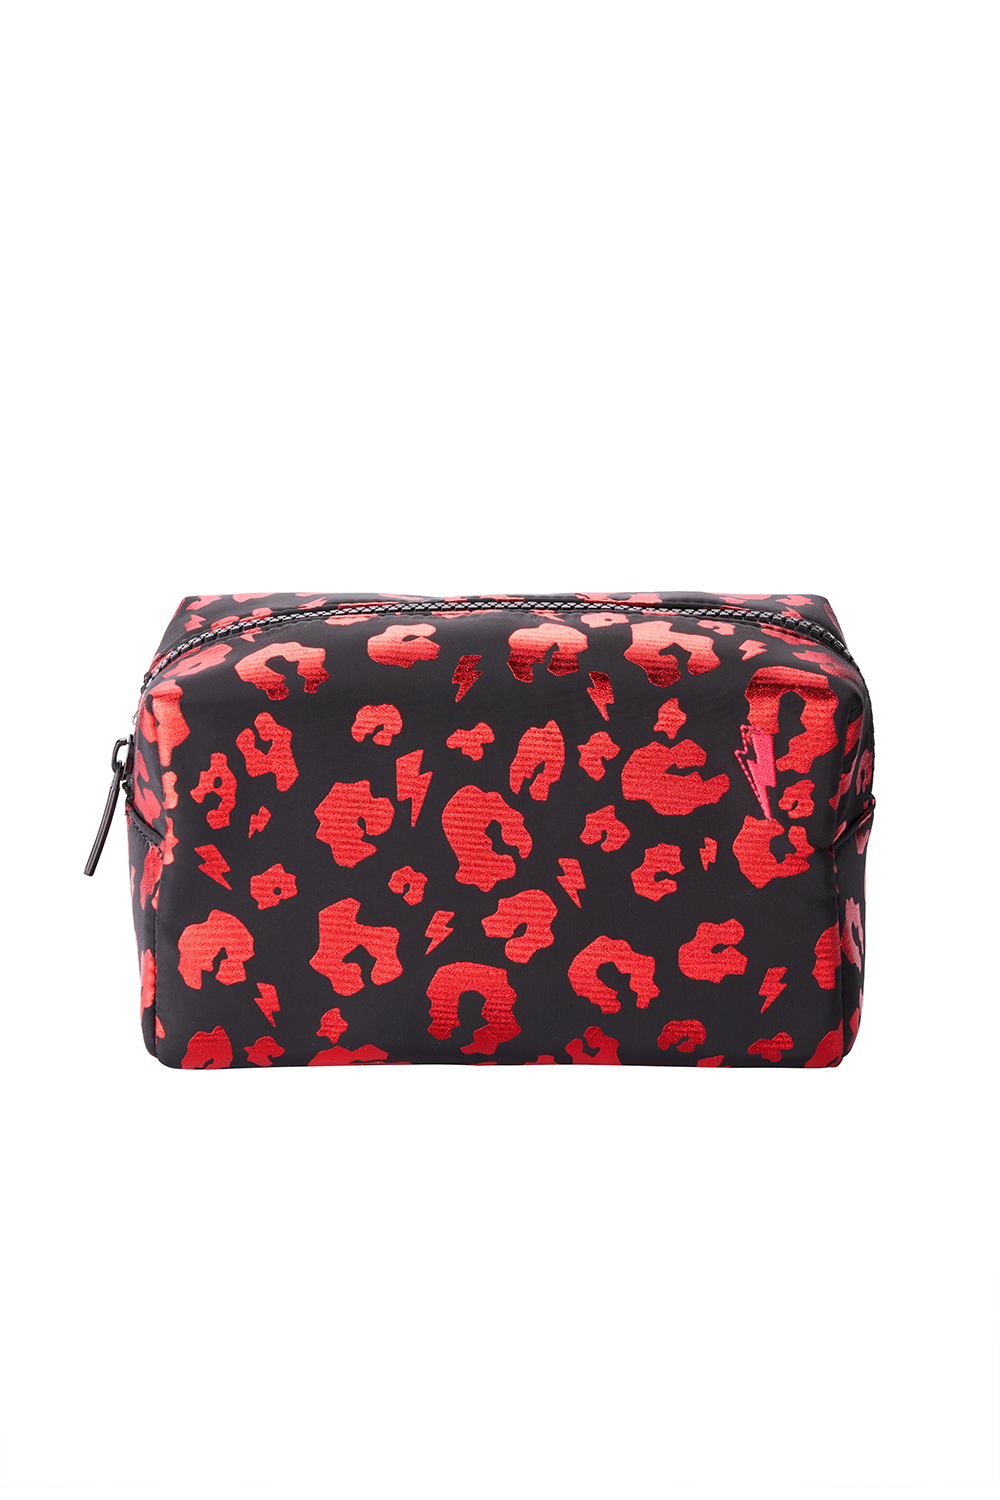 Scamp & Dude: Scamp & Dude x Ruby Hammer Black With Red Foil Leopard Makeup Bag